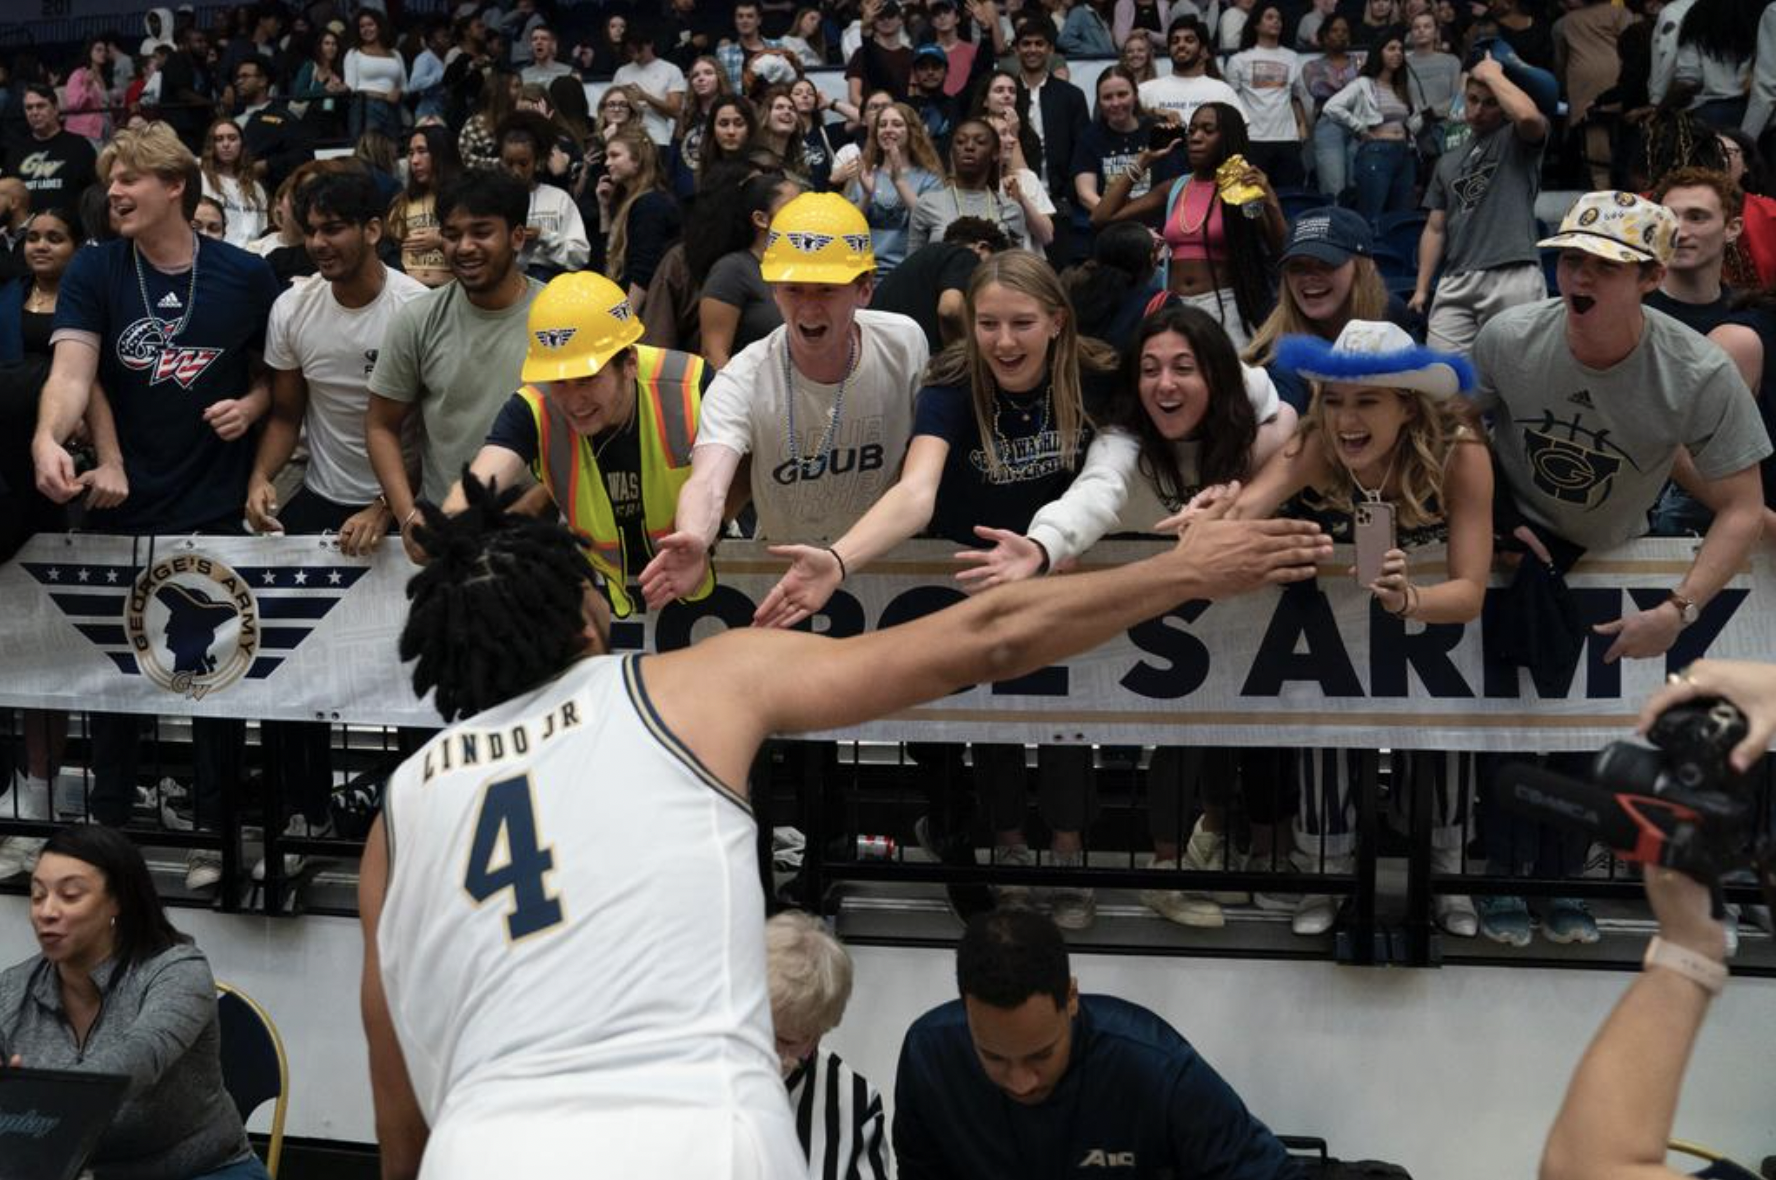 Fans and players high five at last month's game against Howard University. (Jess Rapfogel/GW Sports)